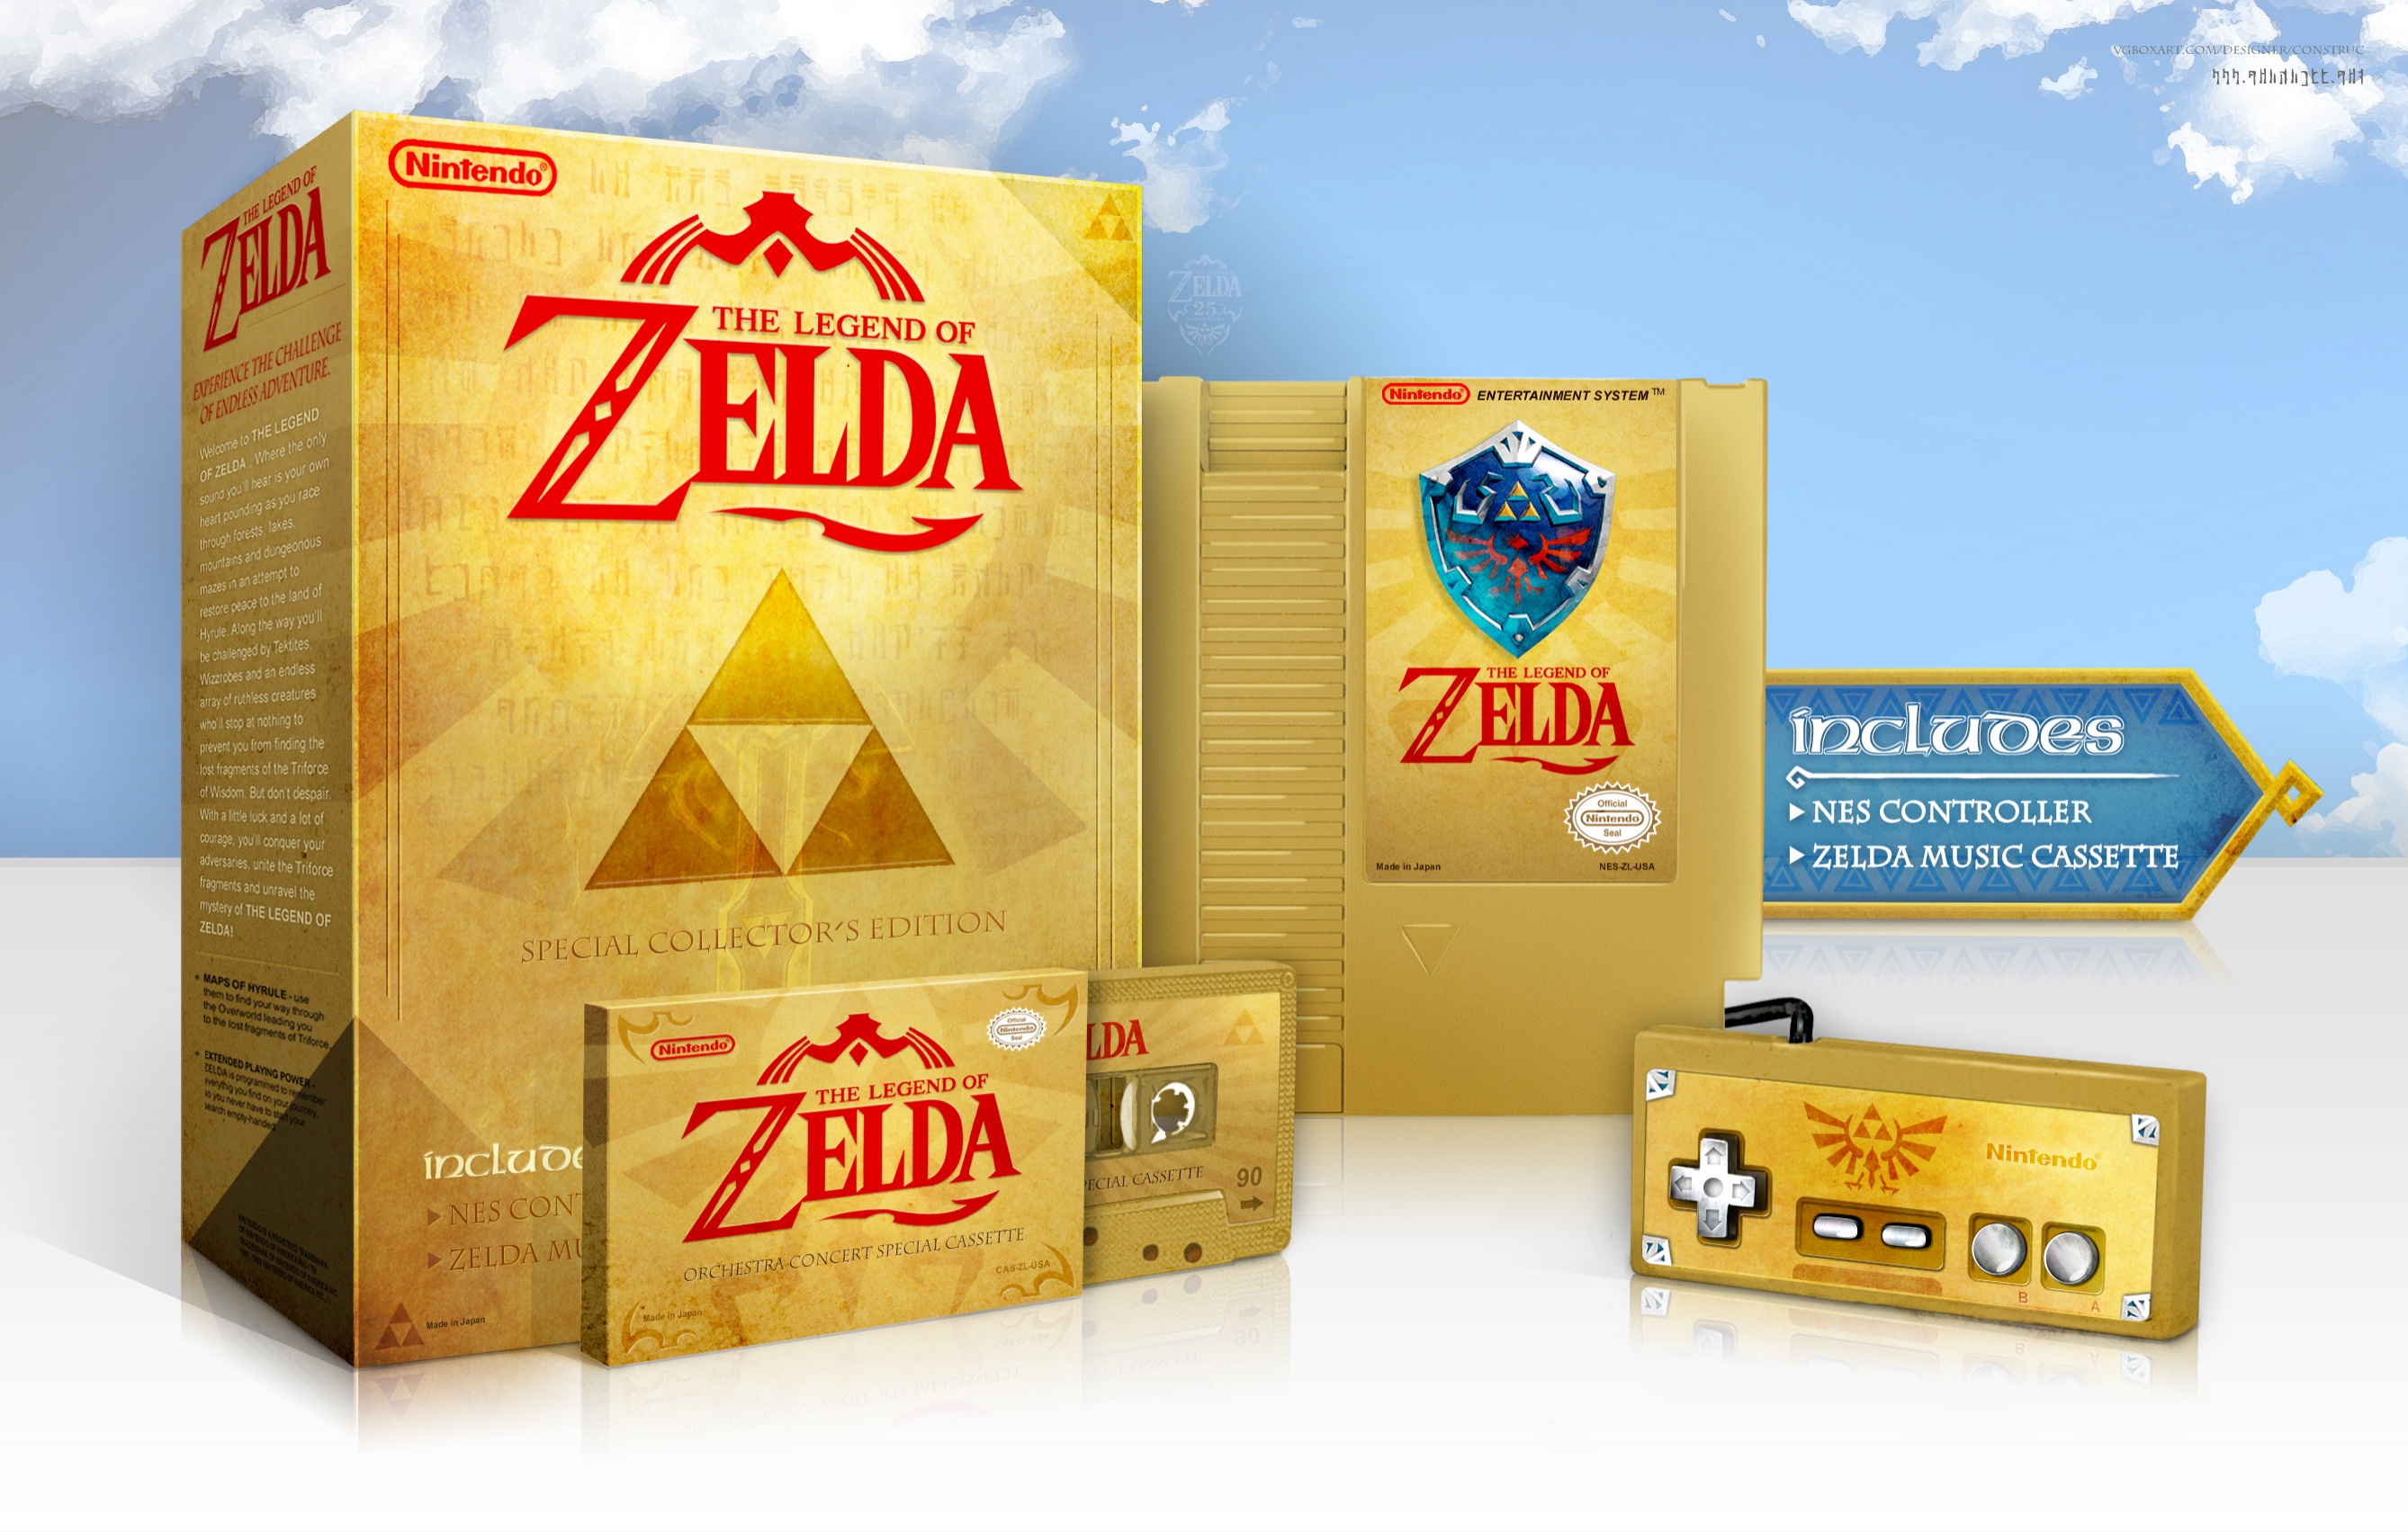 What if there was a NES Zelda Collector's Edition - Zelda Dungeon